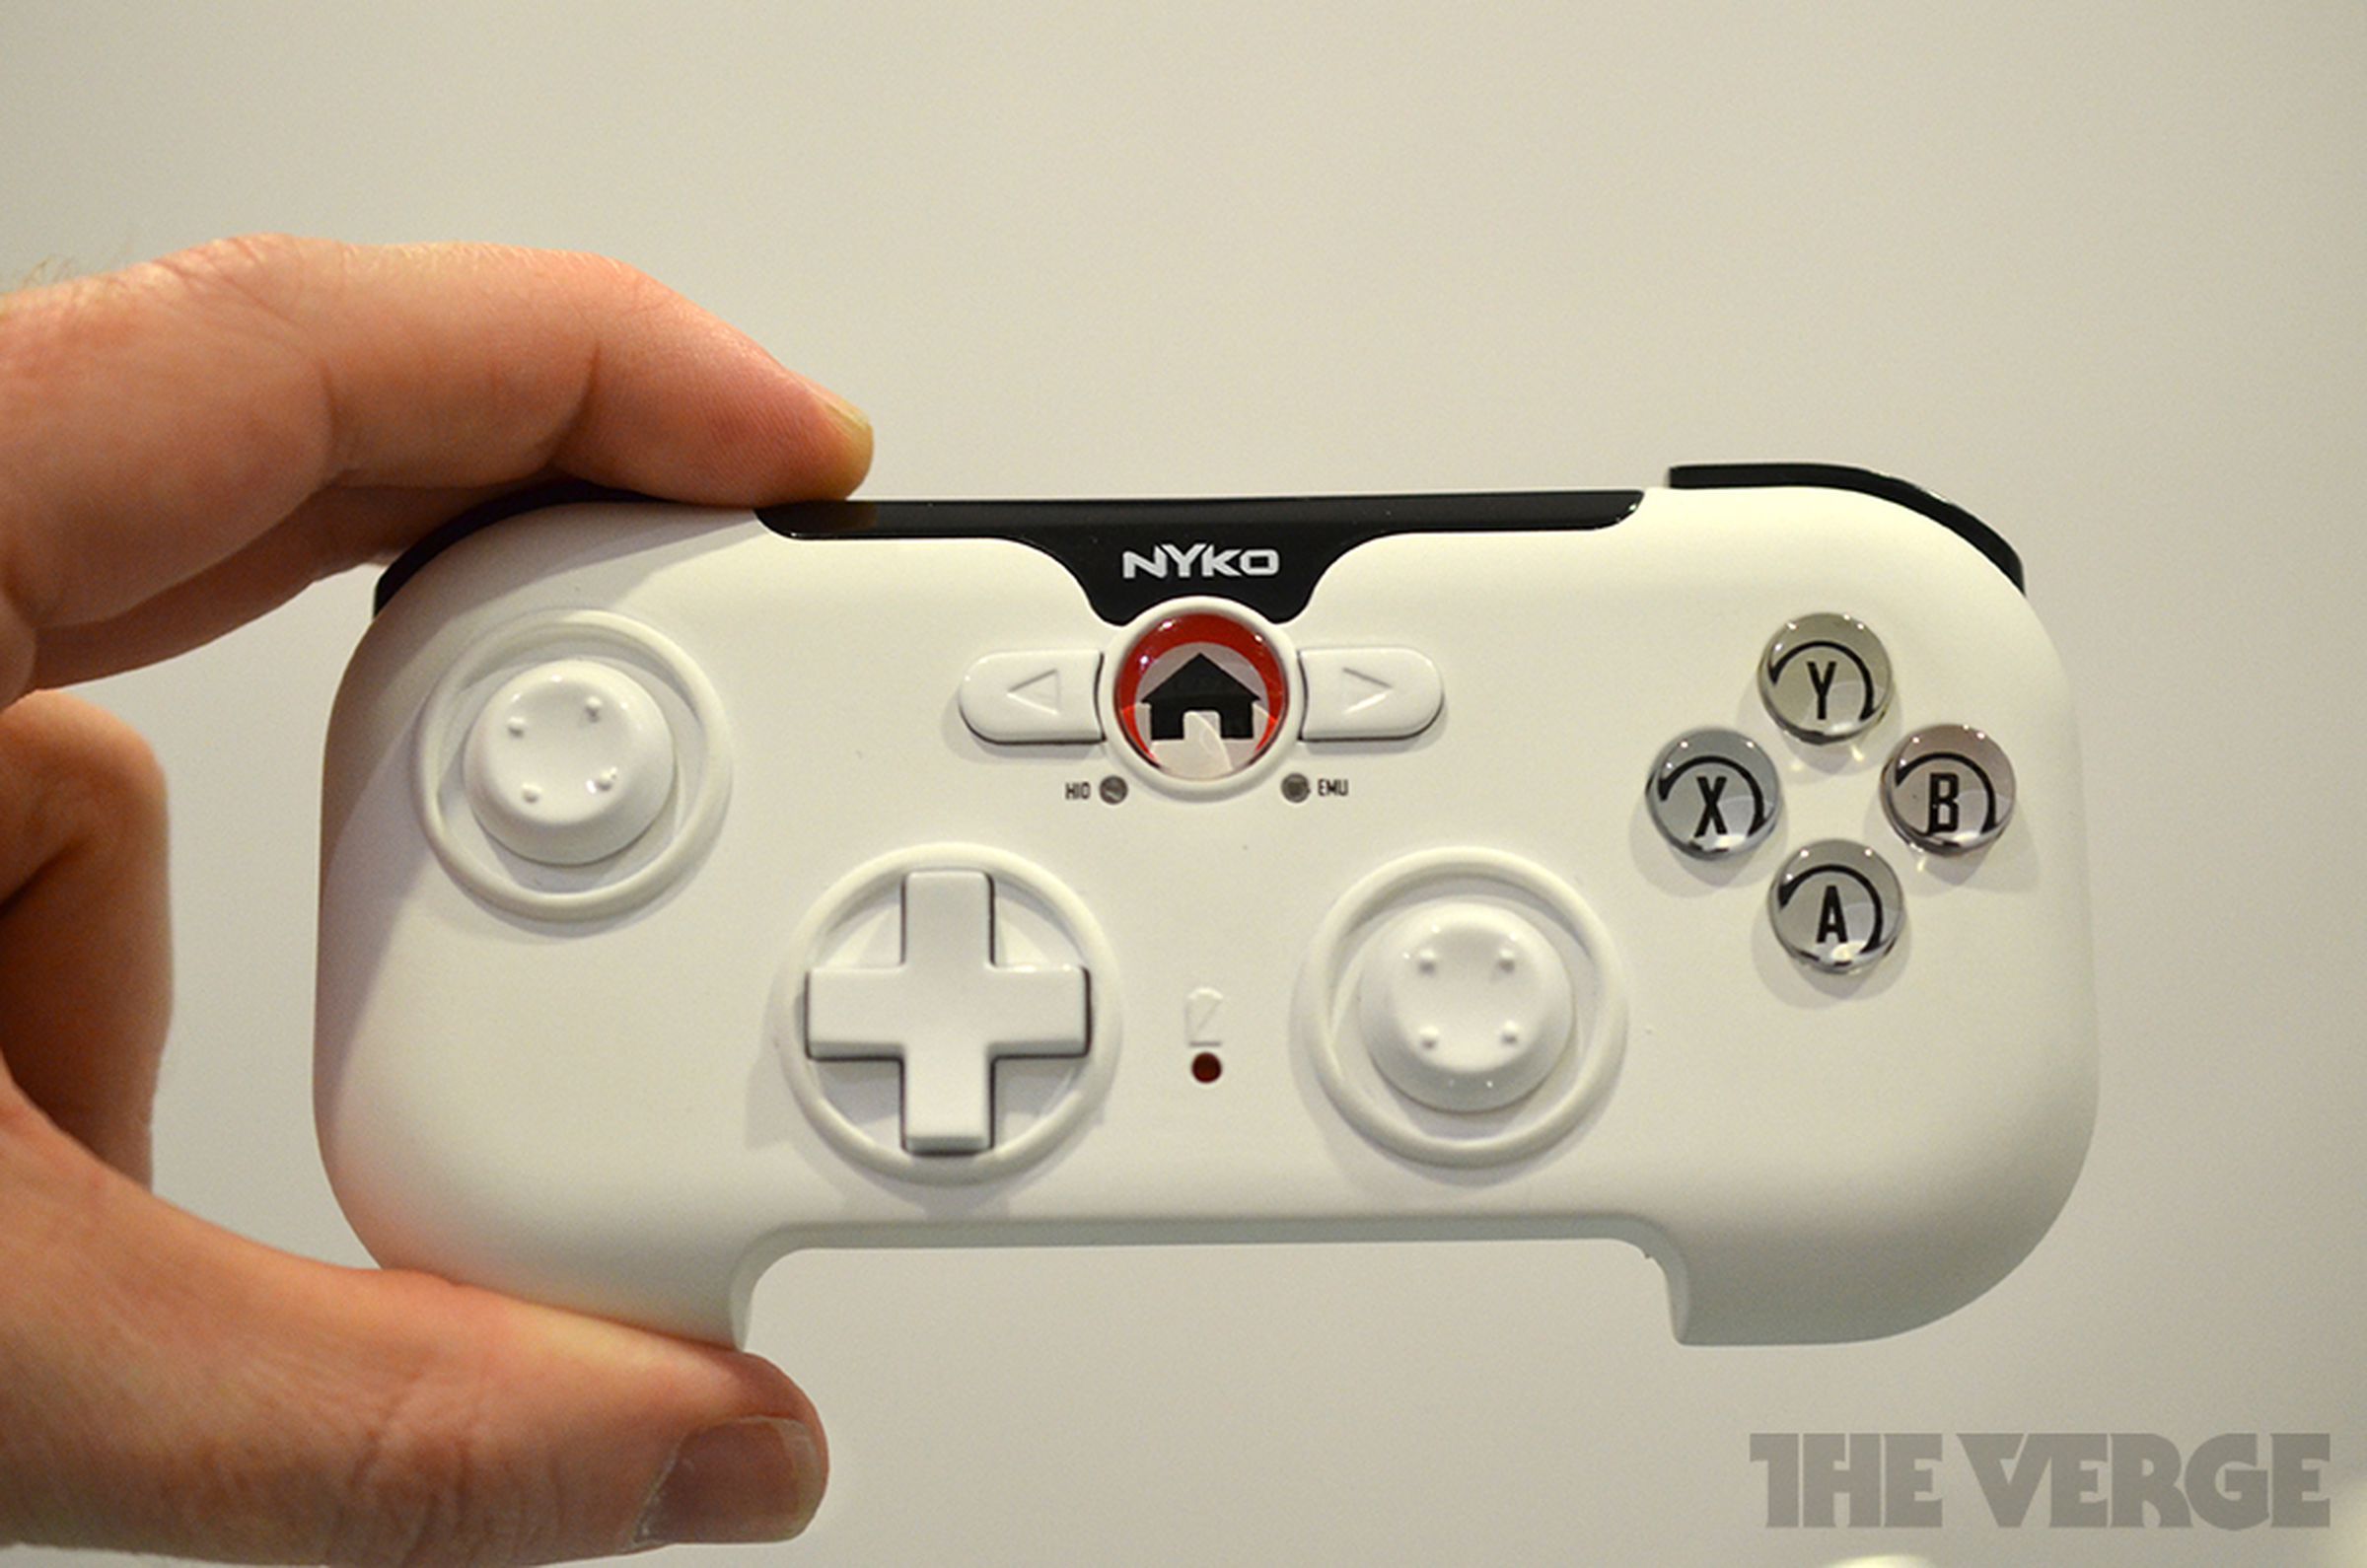 Nyko's PlayPad Android controllers and Free Fighter PS3 arcade stick hands-on images